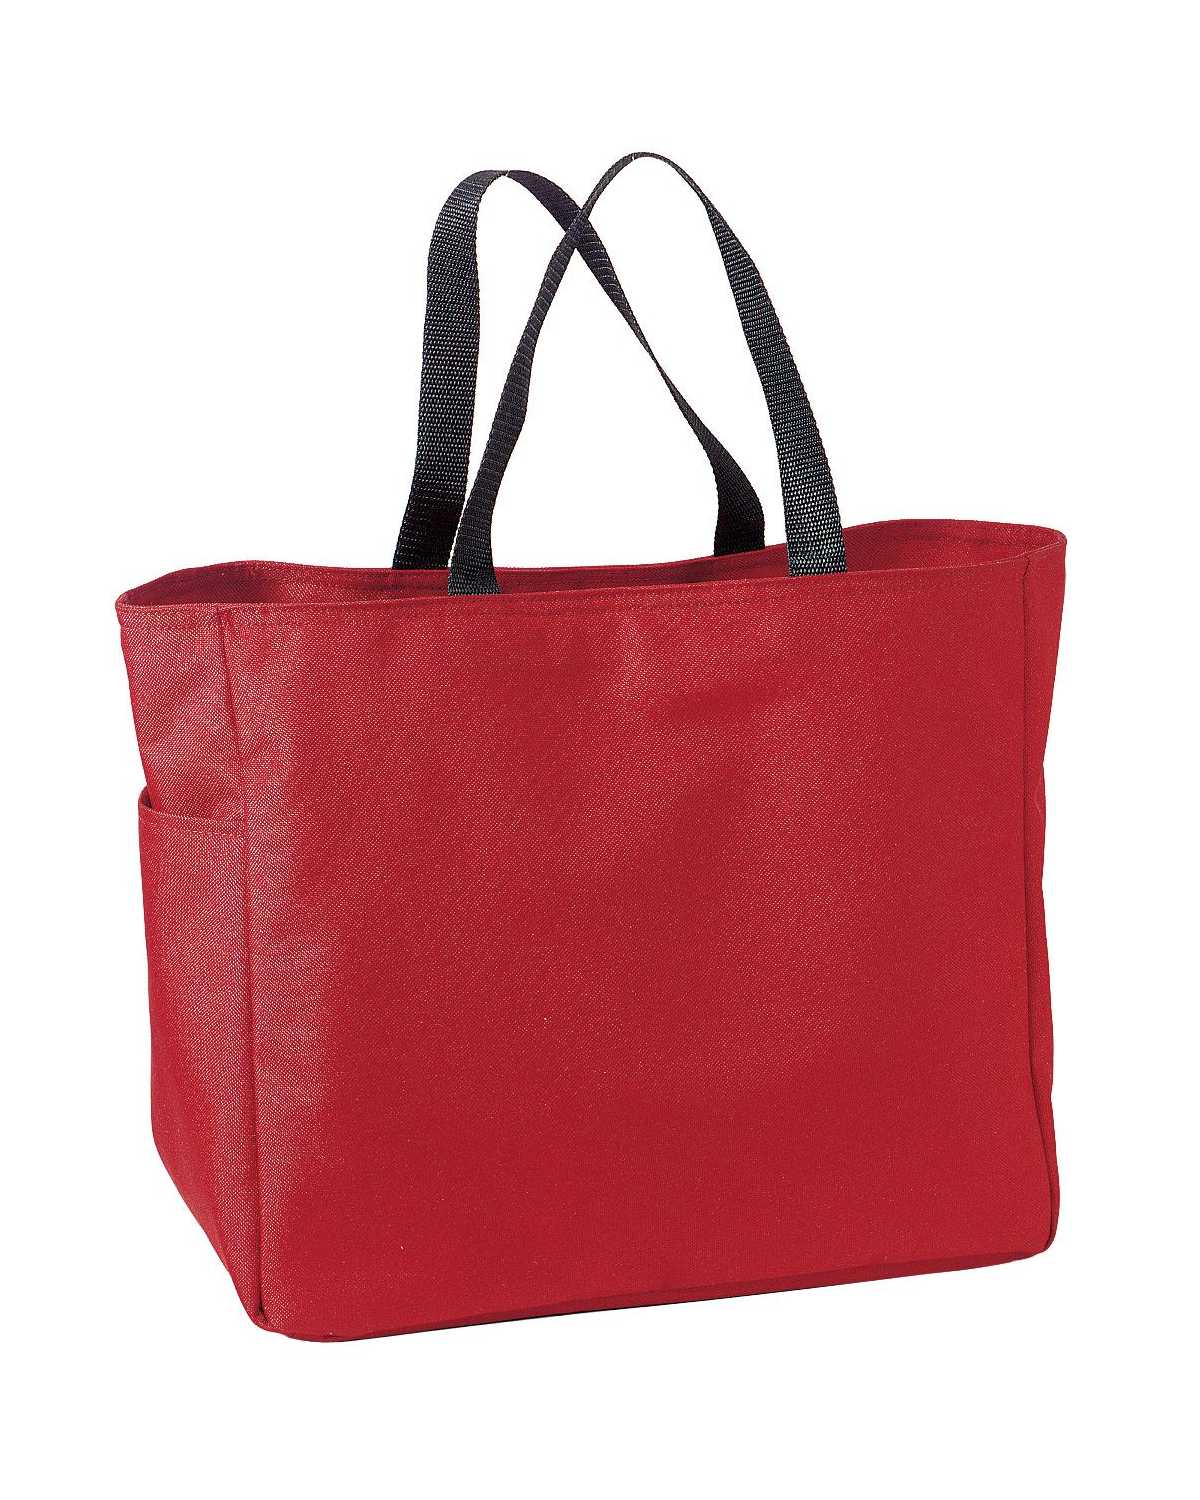 Port Authority B0750 Essential Tote on discount | ApparelChoice.com